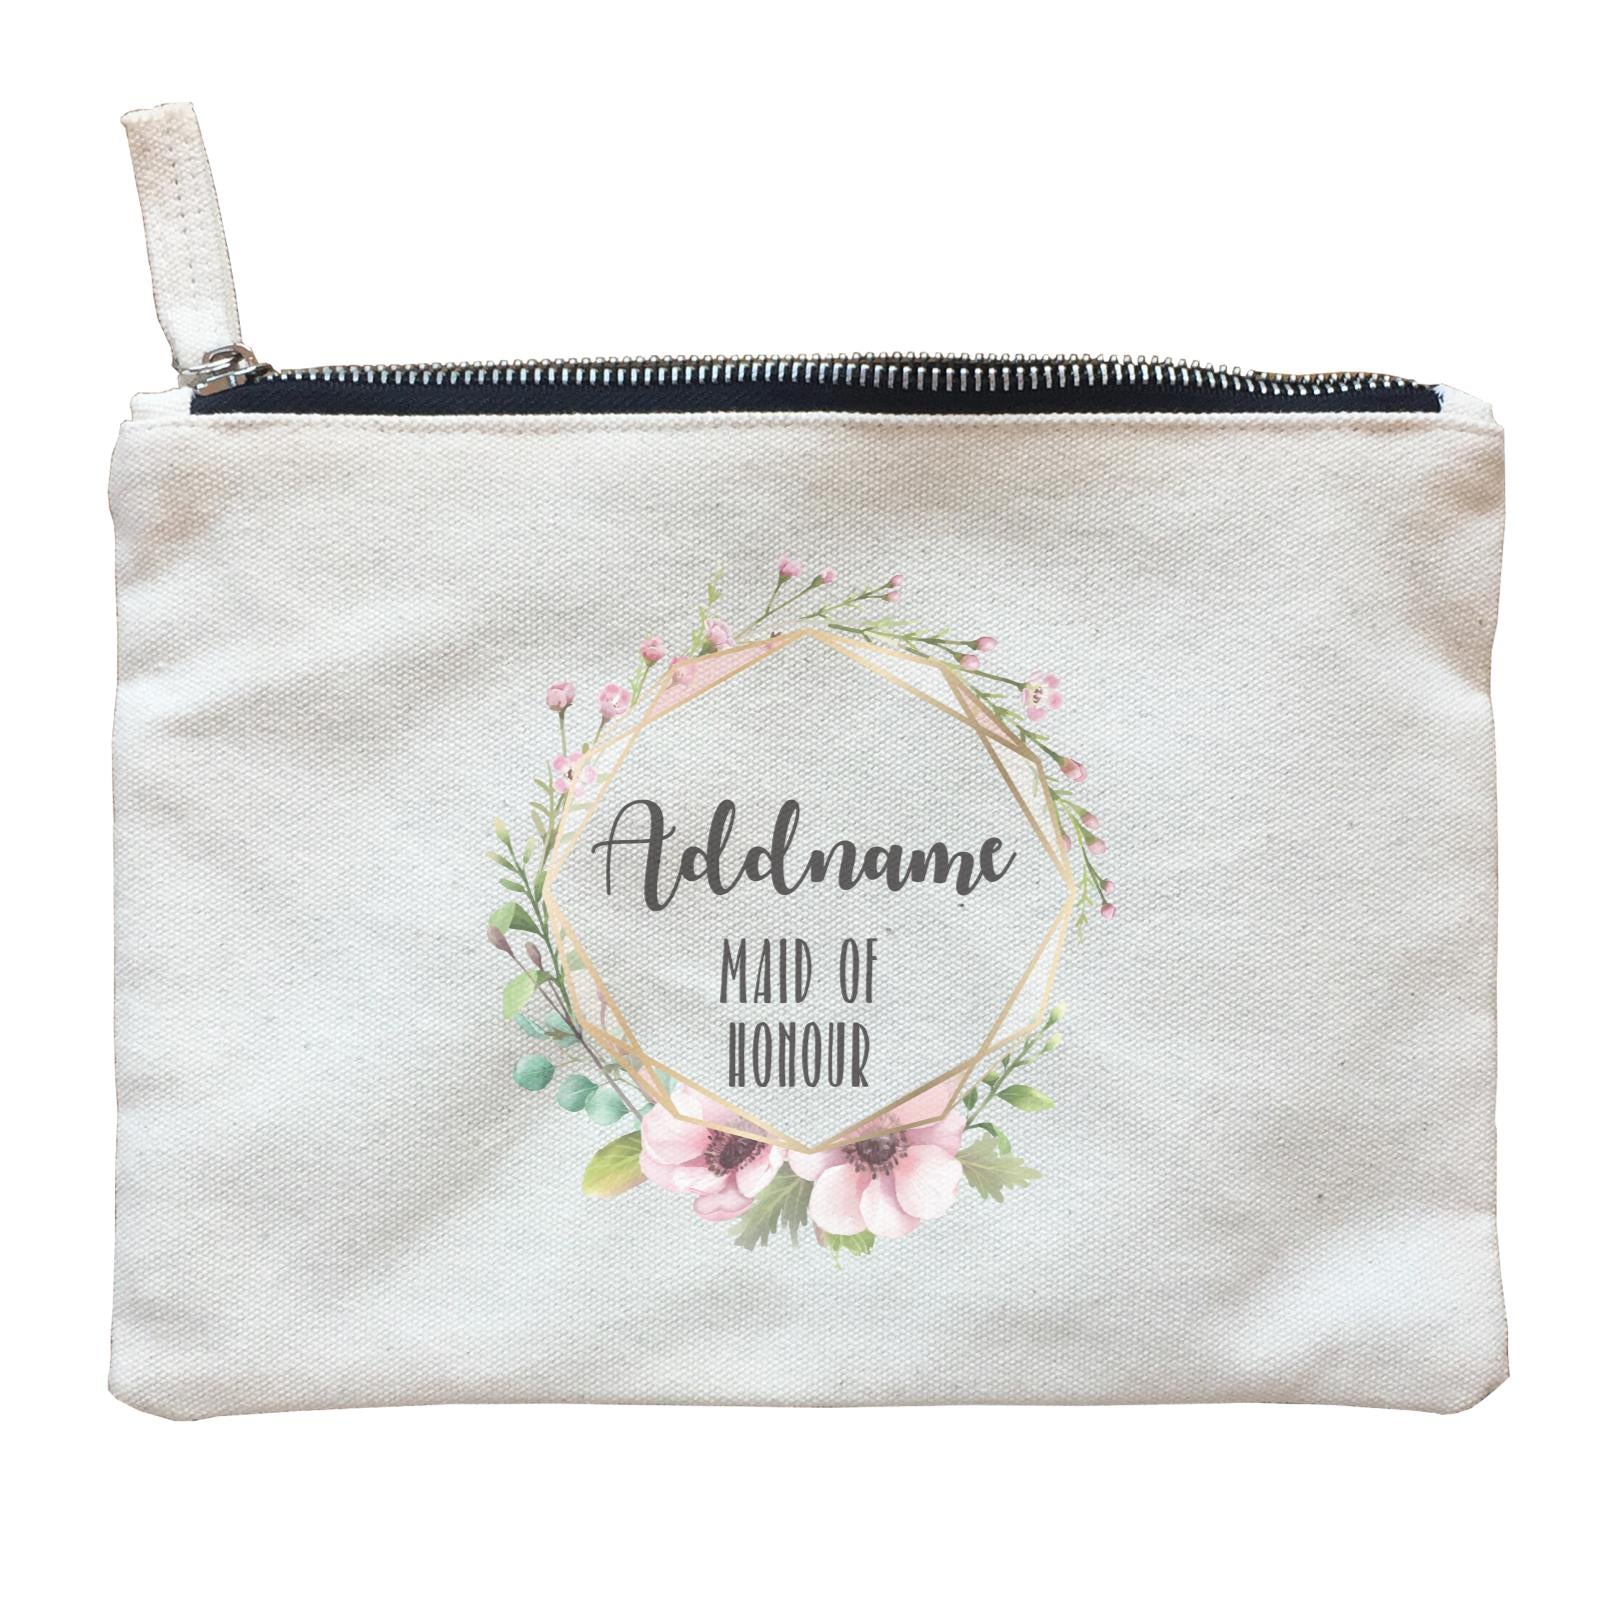 Bridesmaid Floral Modern Pink with Geometric Frame Maid of Honour Addname Zipper Pouch